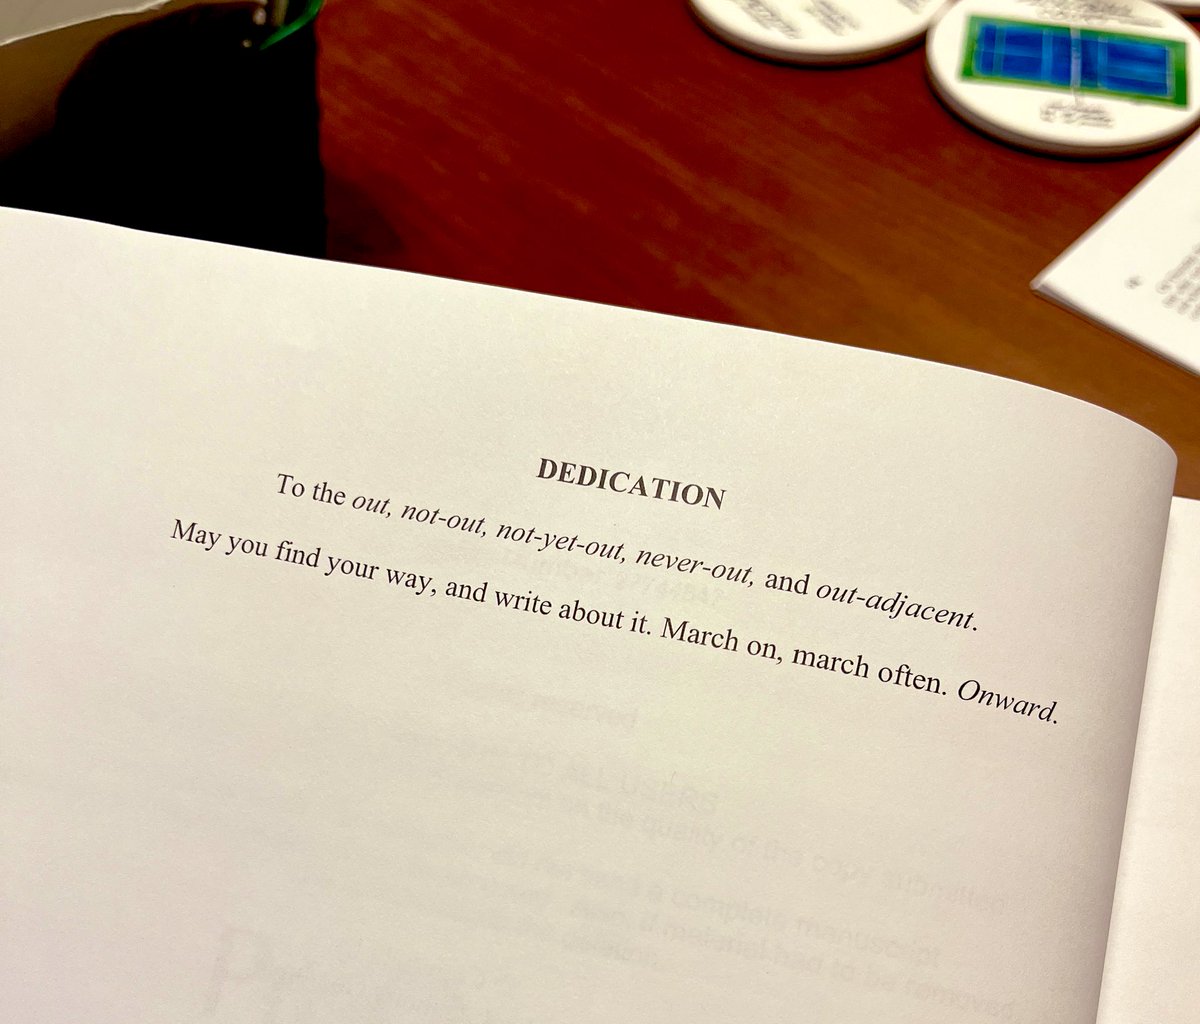 Today a student asked me the difference between the Dedication and Acknowledgements in a dissertation. So, I took mine off the shelf to show her and talk about. It made me so emotional for some reason. Still so proud of this work, and all it took to get this finished.